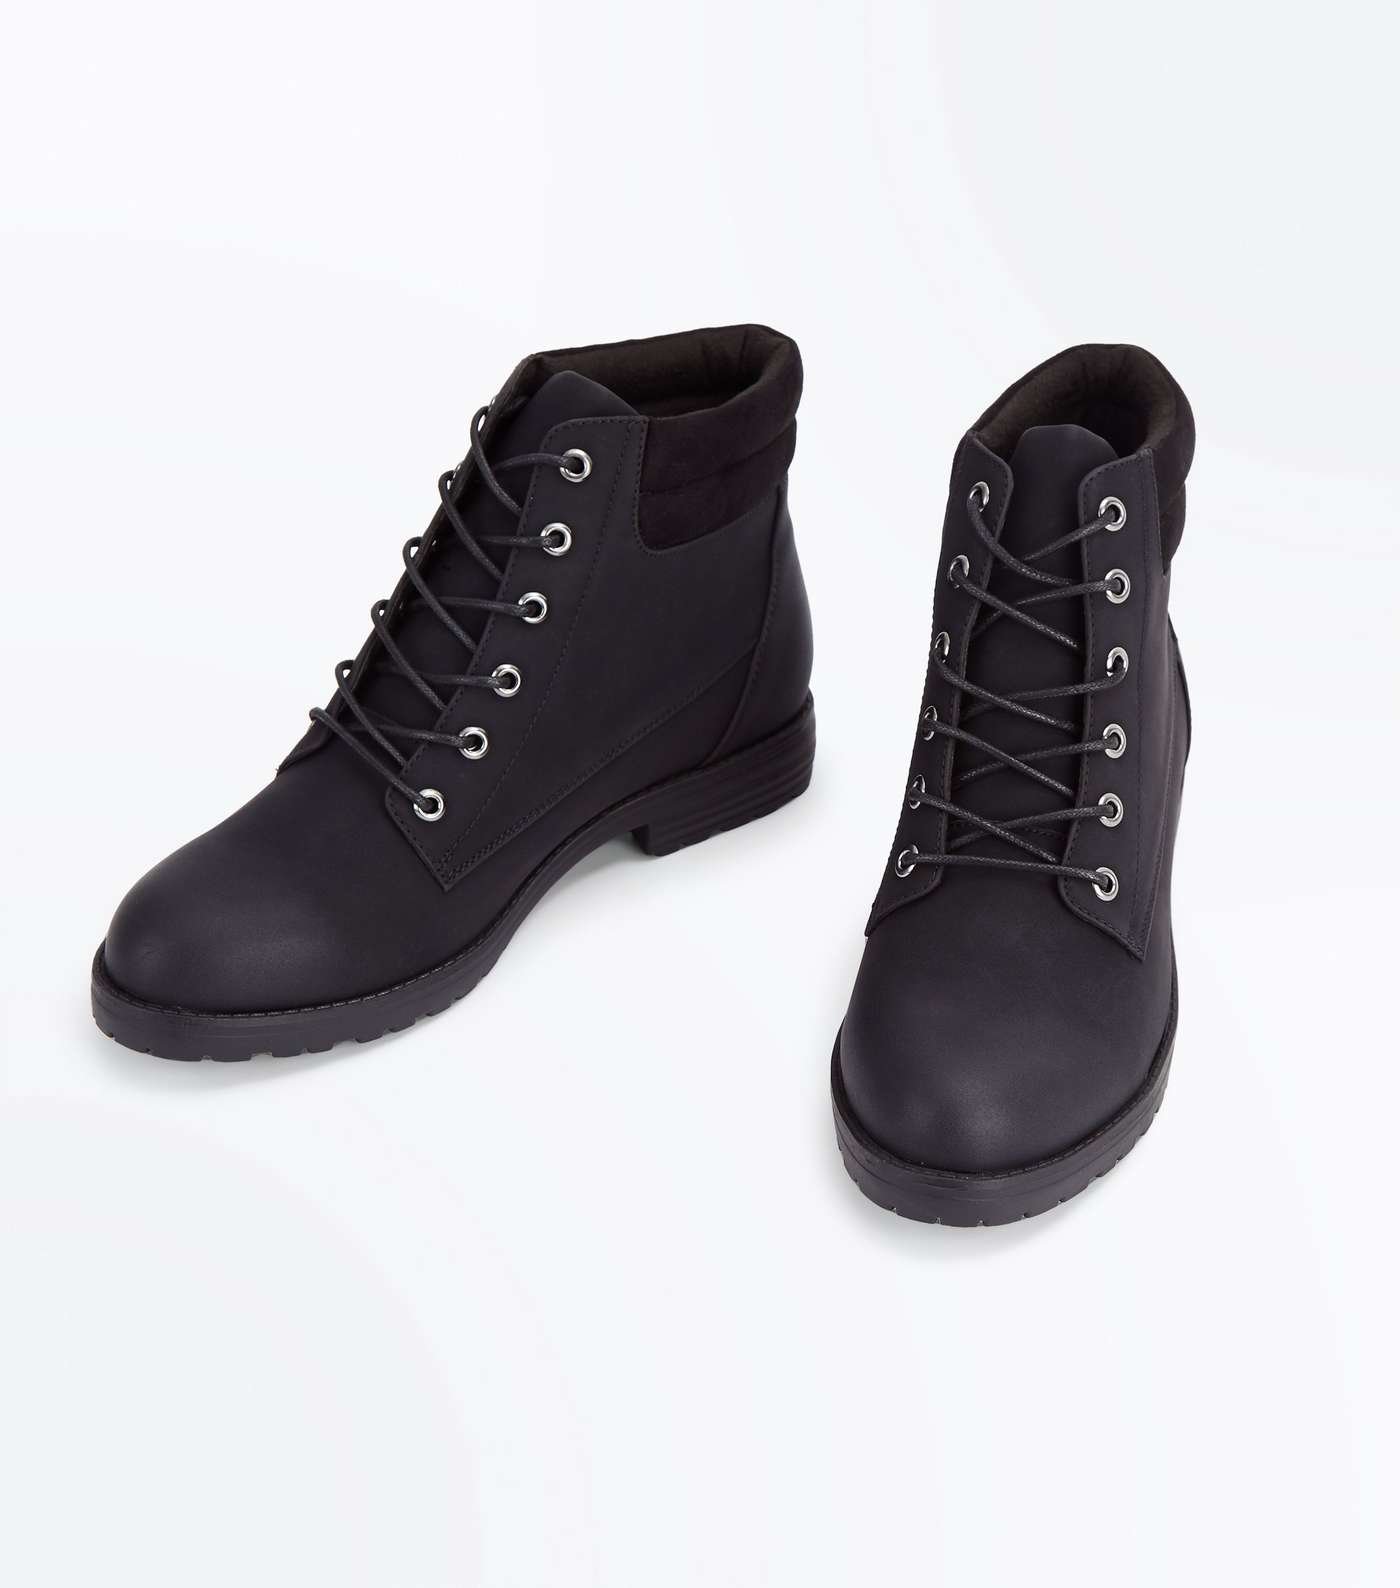 Black Contrast Cuff Lace Up Hiker Boots Image 4